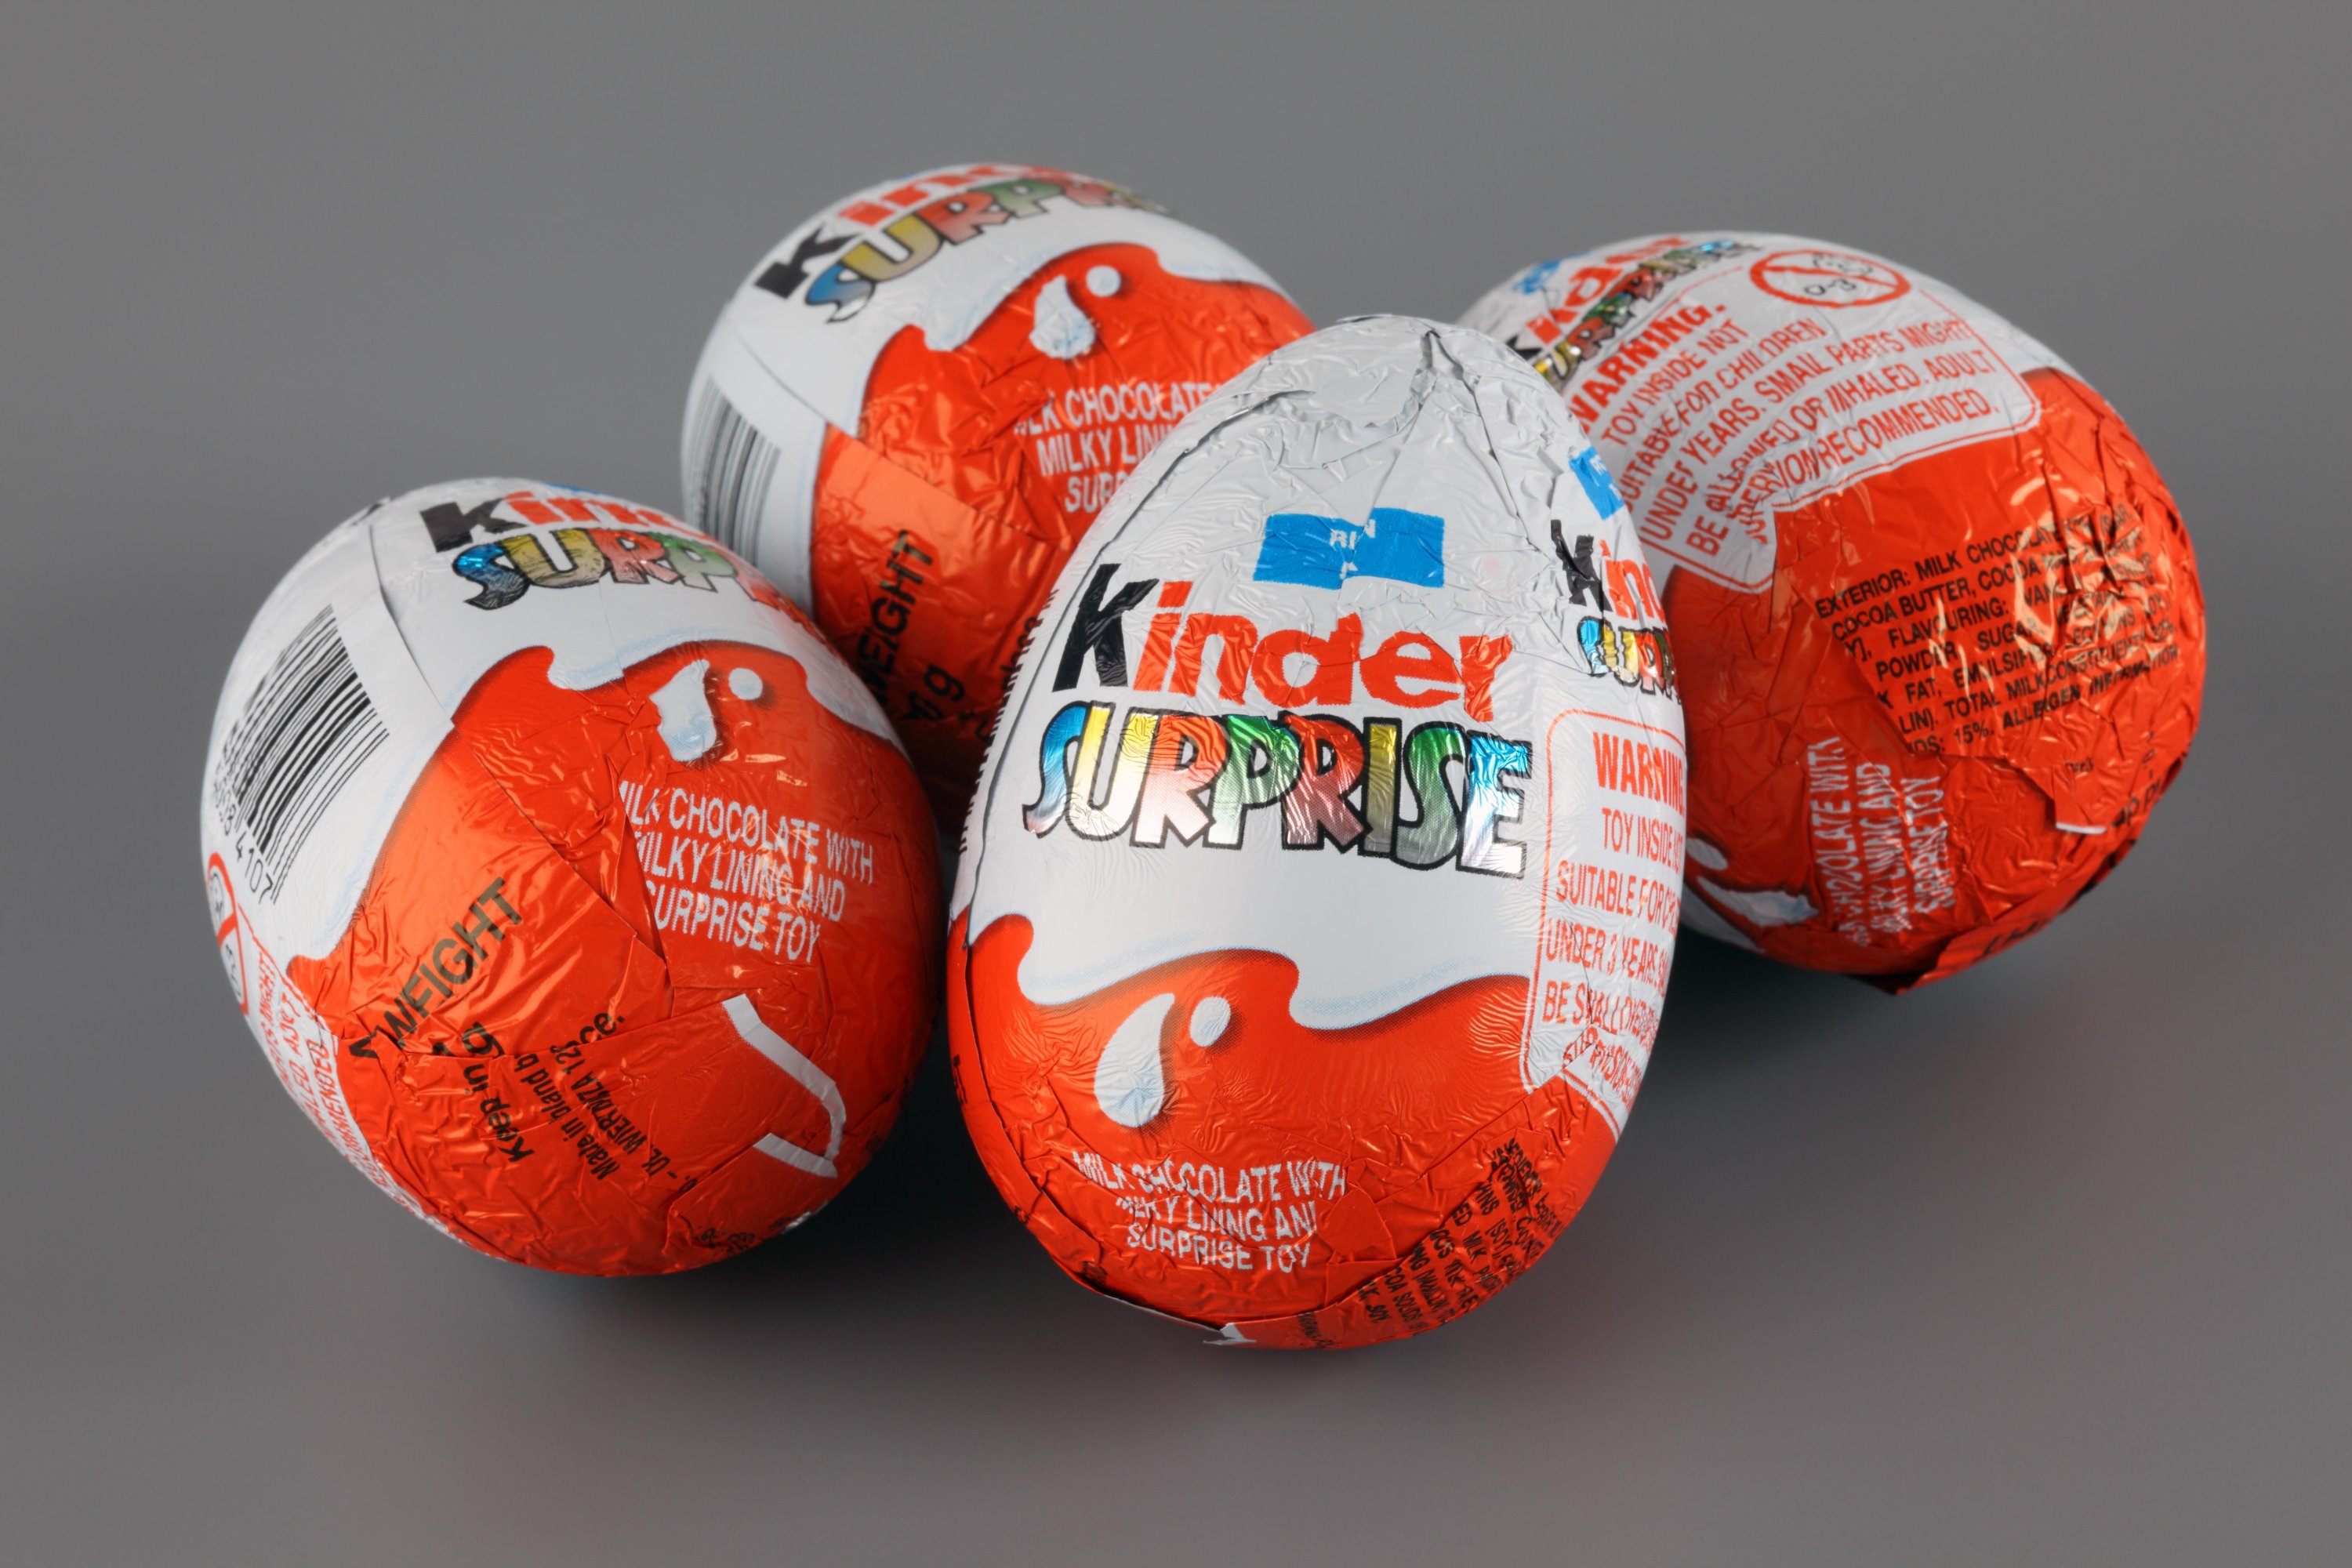 Bad surprise Kinder recalls eggs after 20 infected with ...